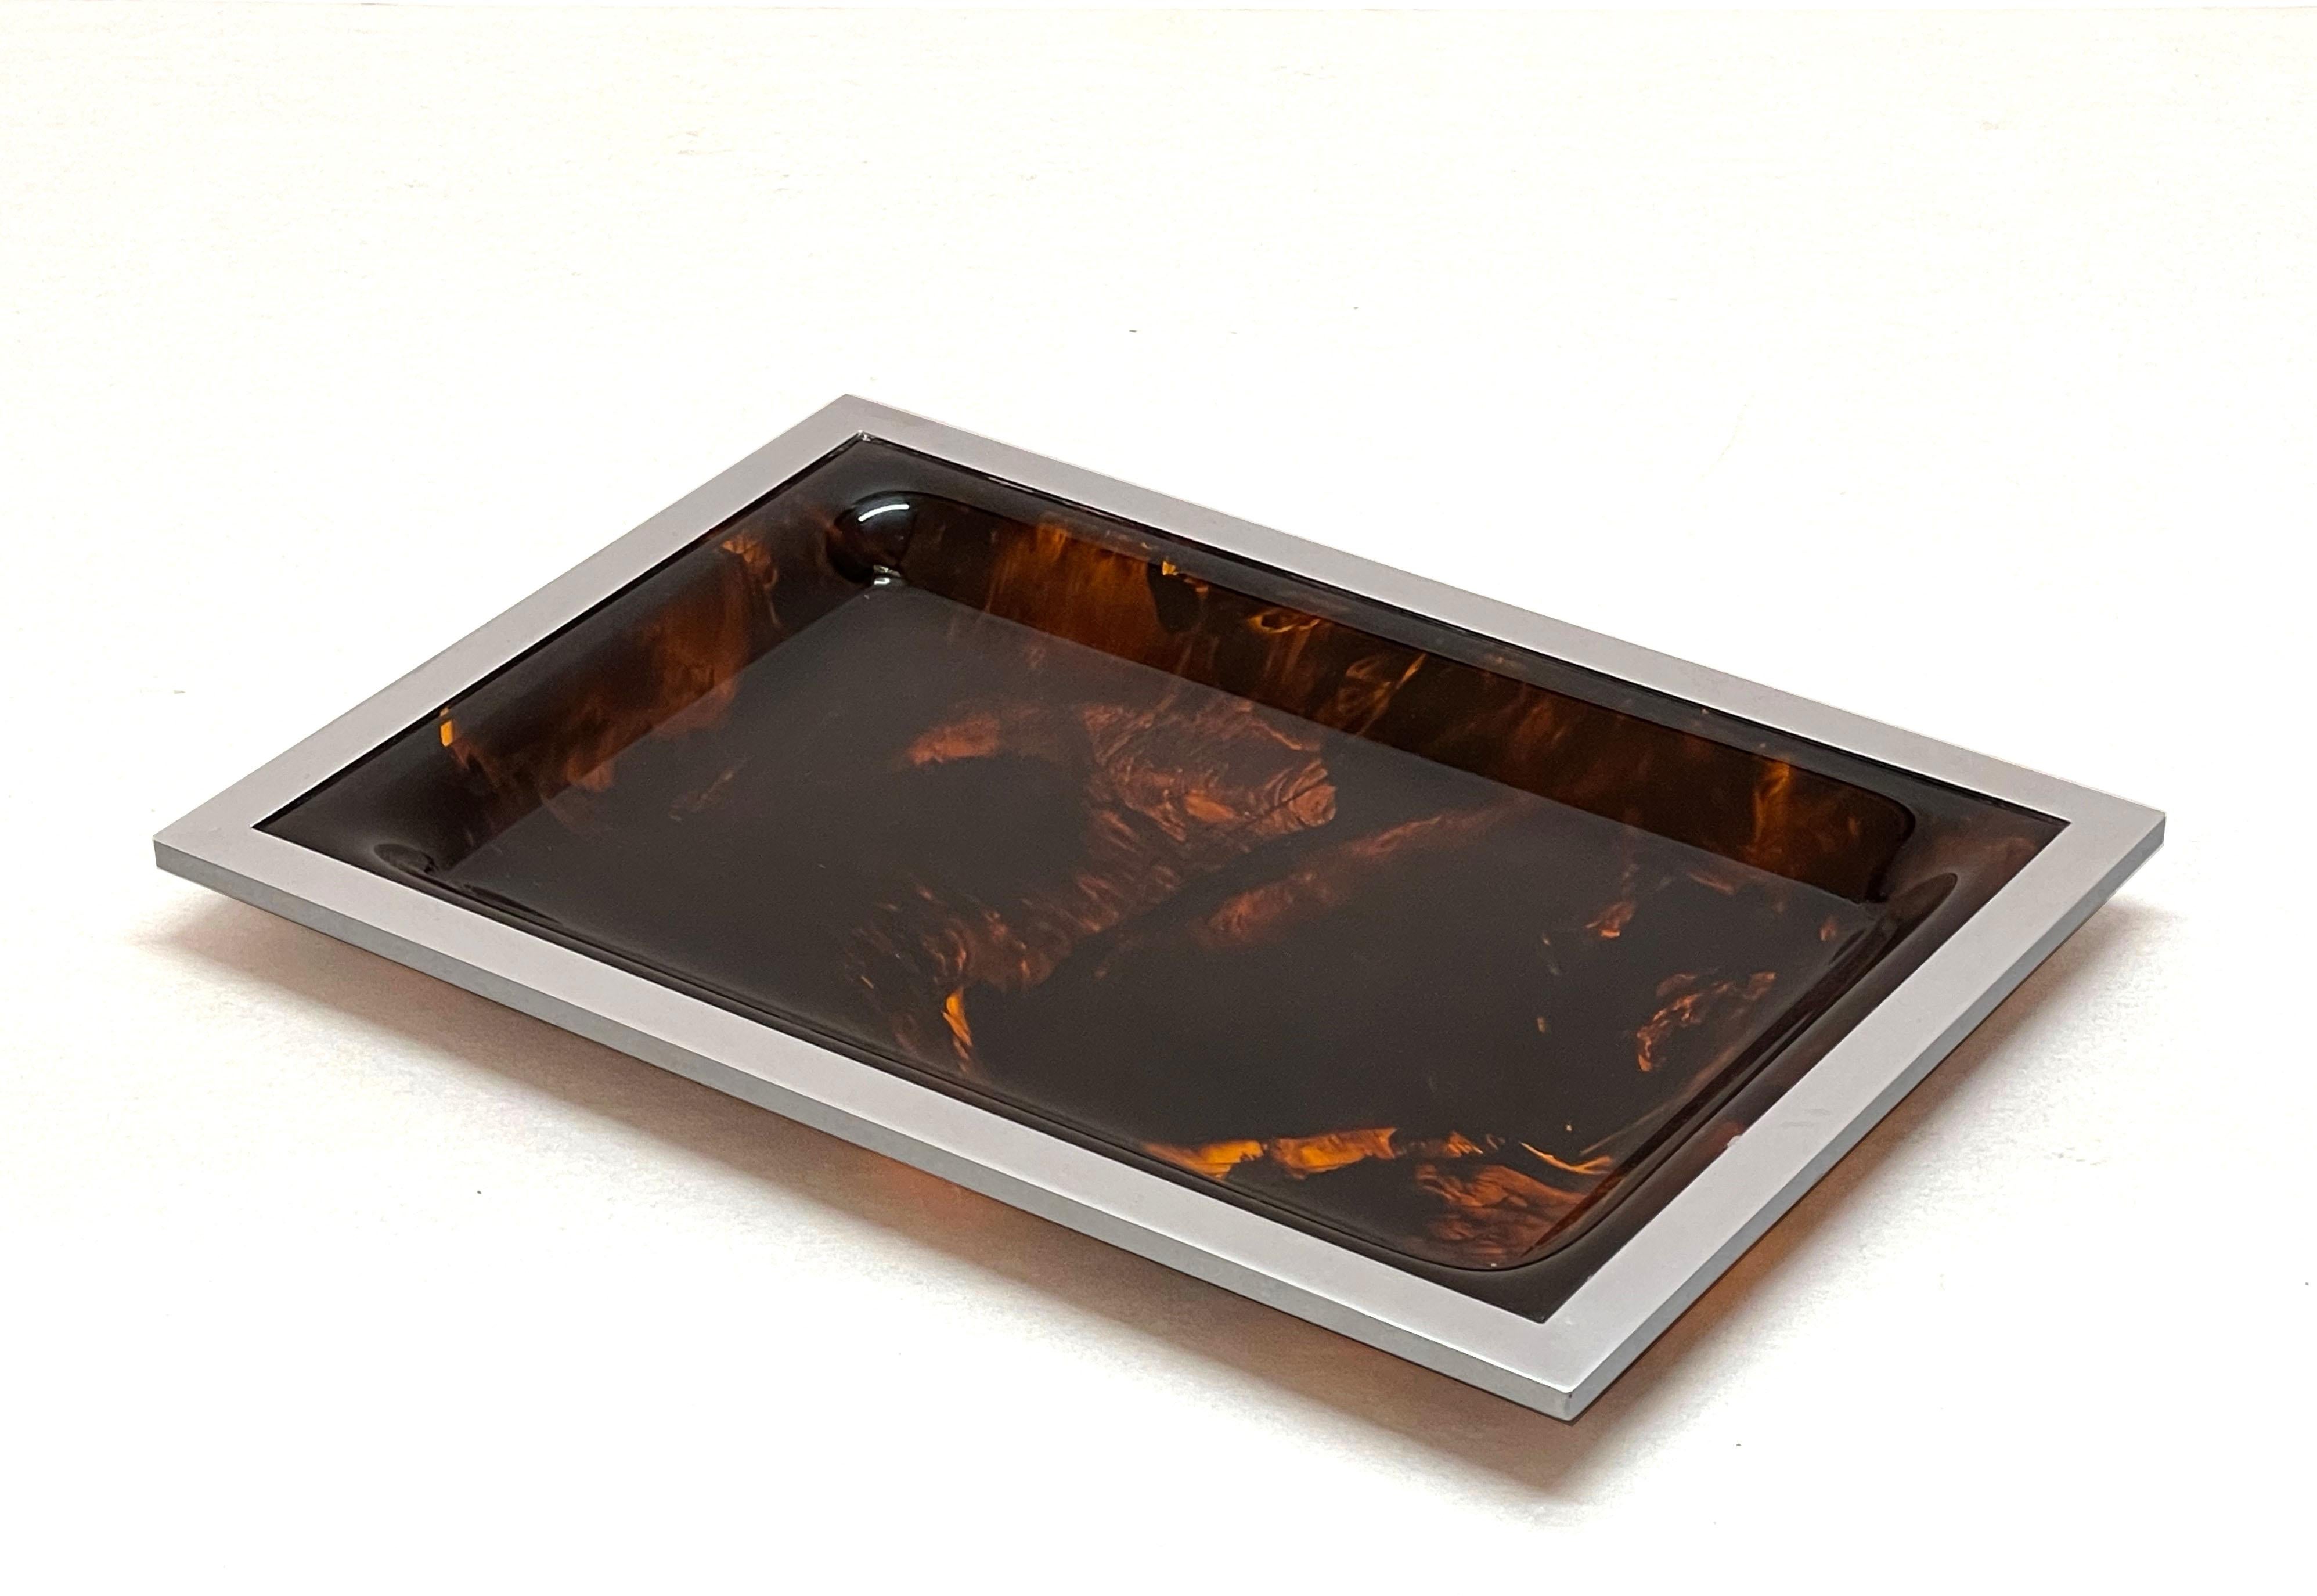 Wonderful midcentury piece of serveware, produced in Italy during the 1970s.

Its design is attributed to Willy Rizzo for a Christian Dior home production.

It is an iconic metal-framed tortoiseshell and Lucite serving tray or platter that will